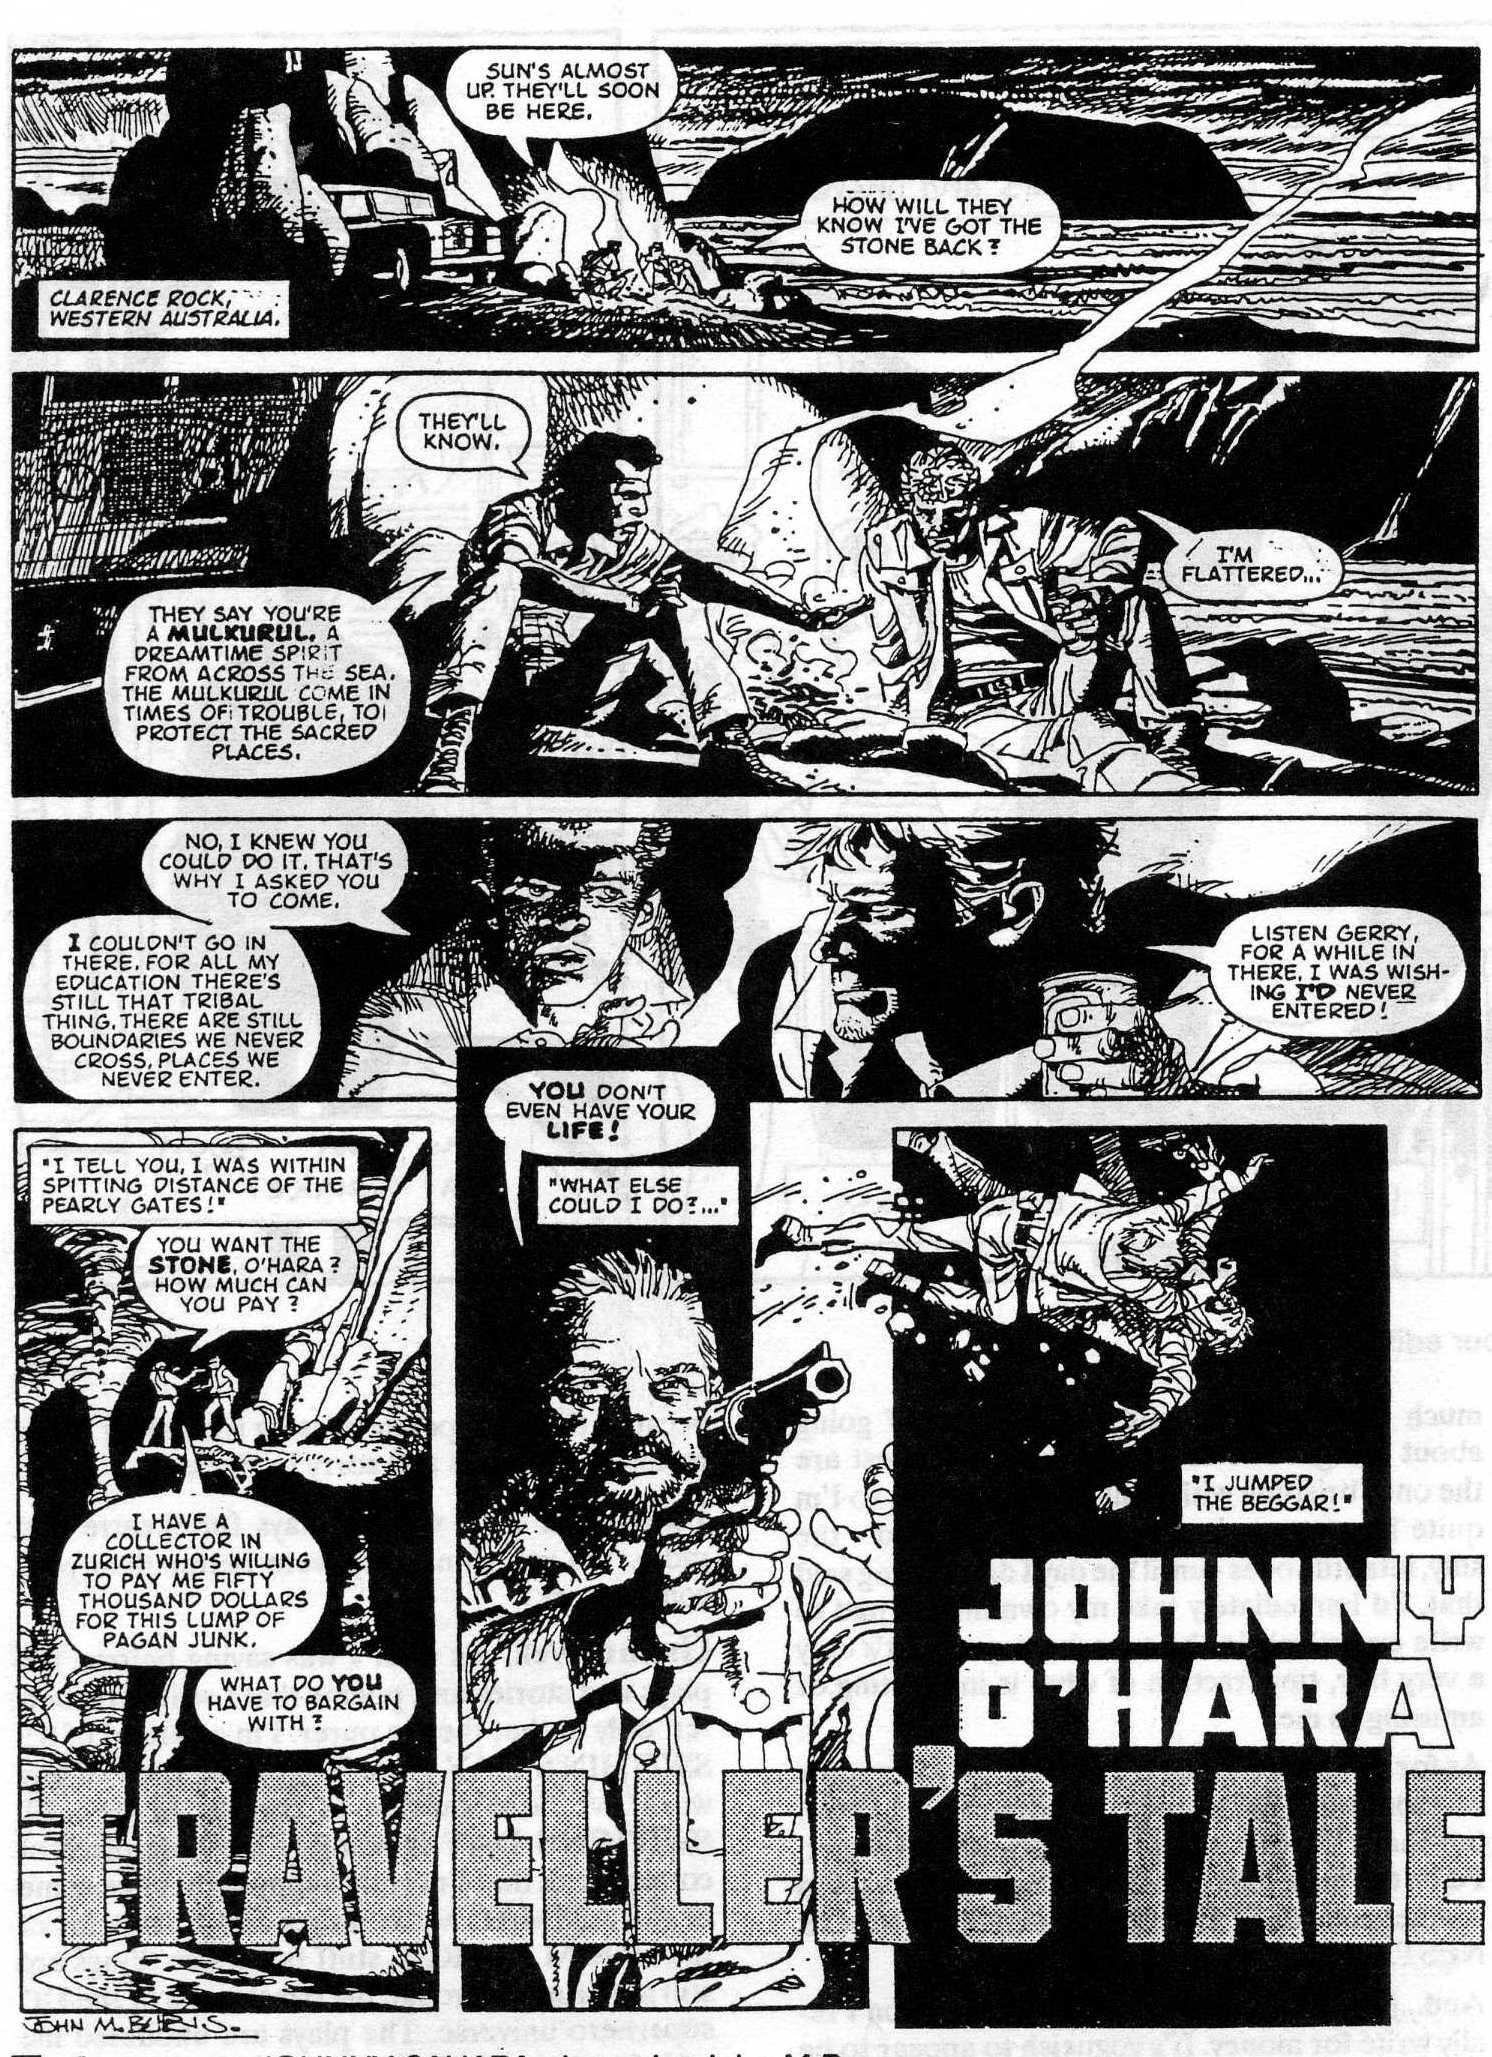 Art from the planned “Johnny O’Hara” strip by Grant Morrison and John M. Burns, which first saw the light of day in Paul Duncan’s ARK zine (Issue 32)